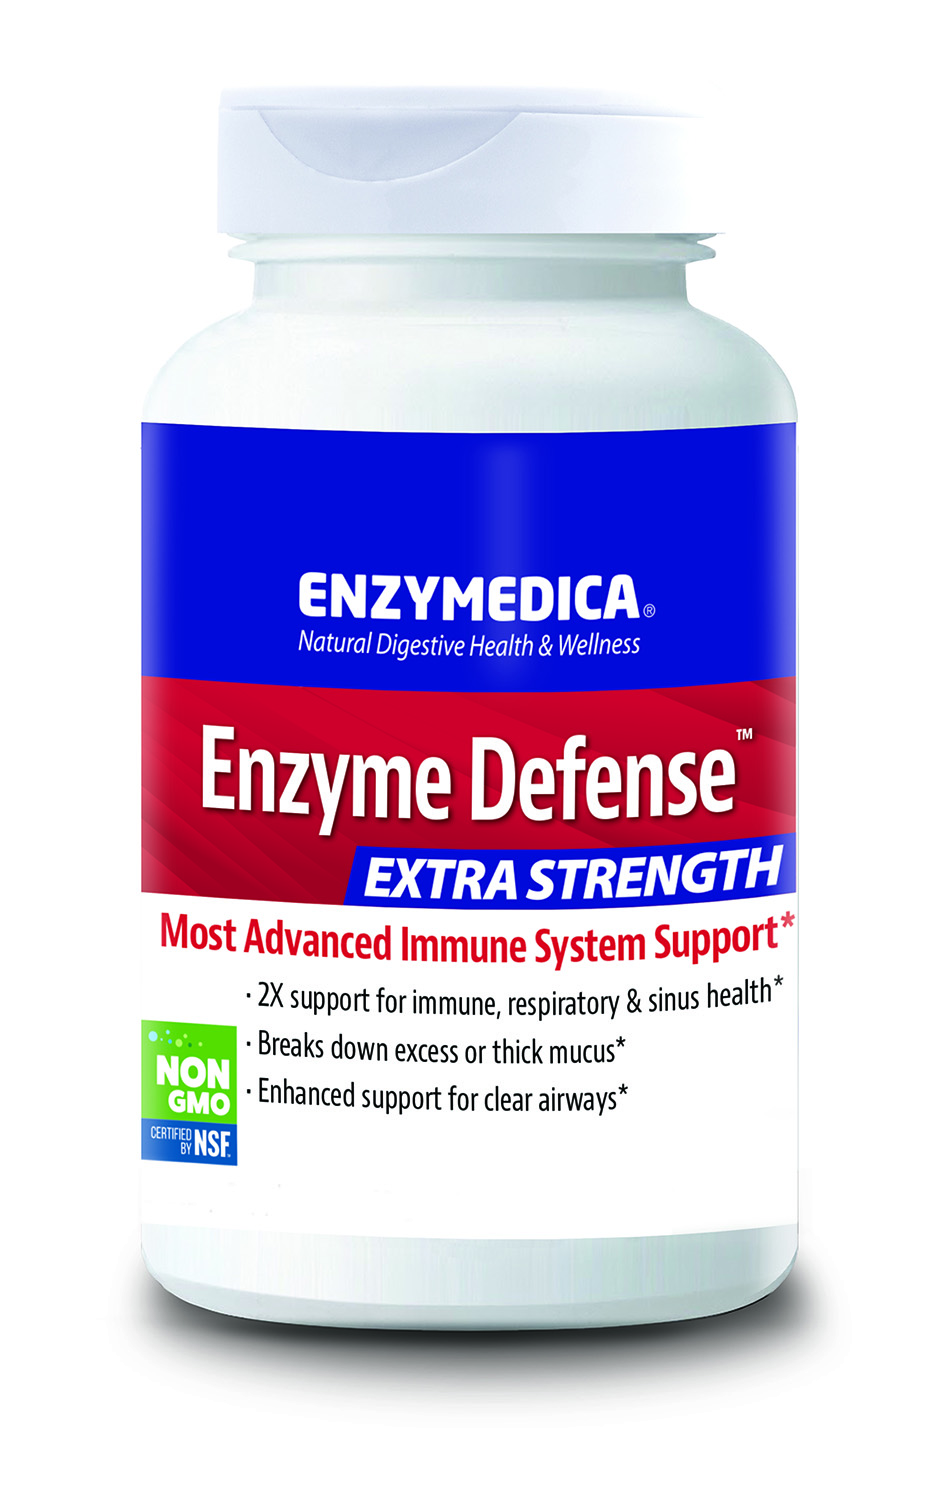 Enzymedica has received more than 50 industry awards including multiple Better Nutrition Magazine’s People's Choice Awards, many Best of Supplements Awards and numerous VITY and Nexty Awards.